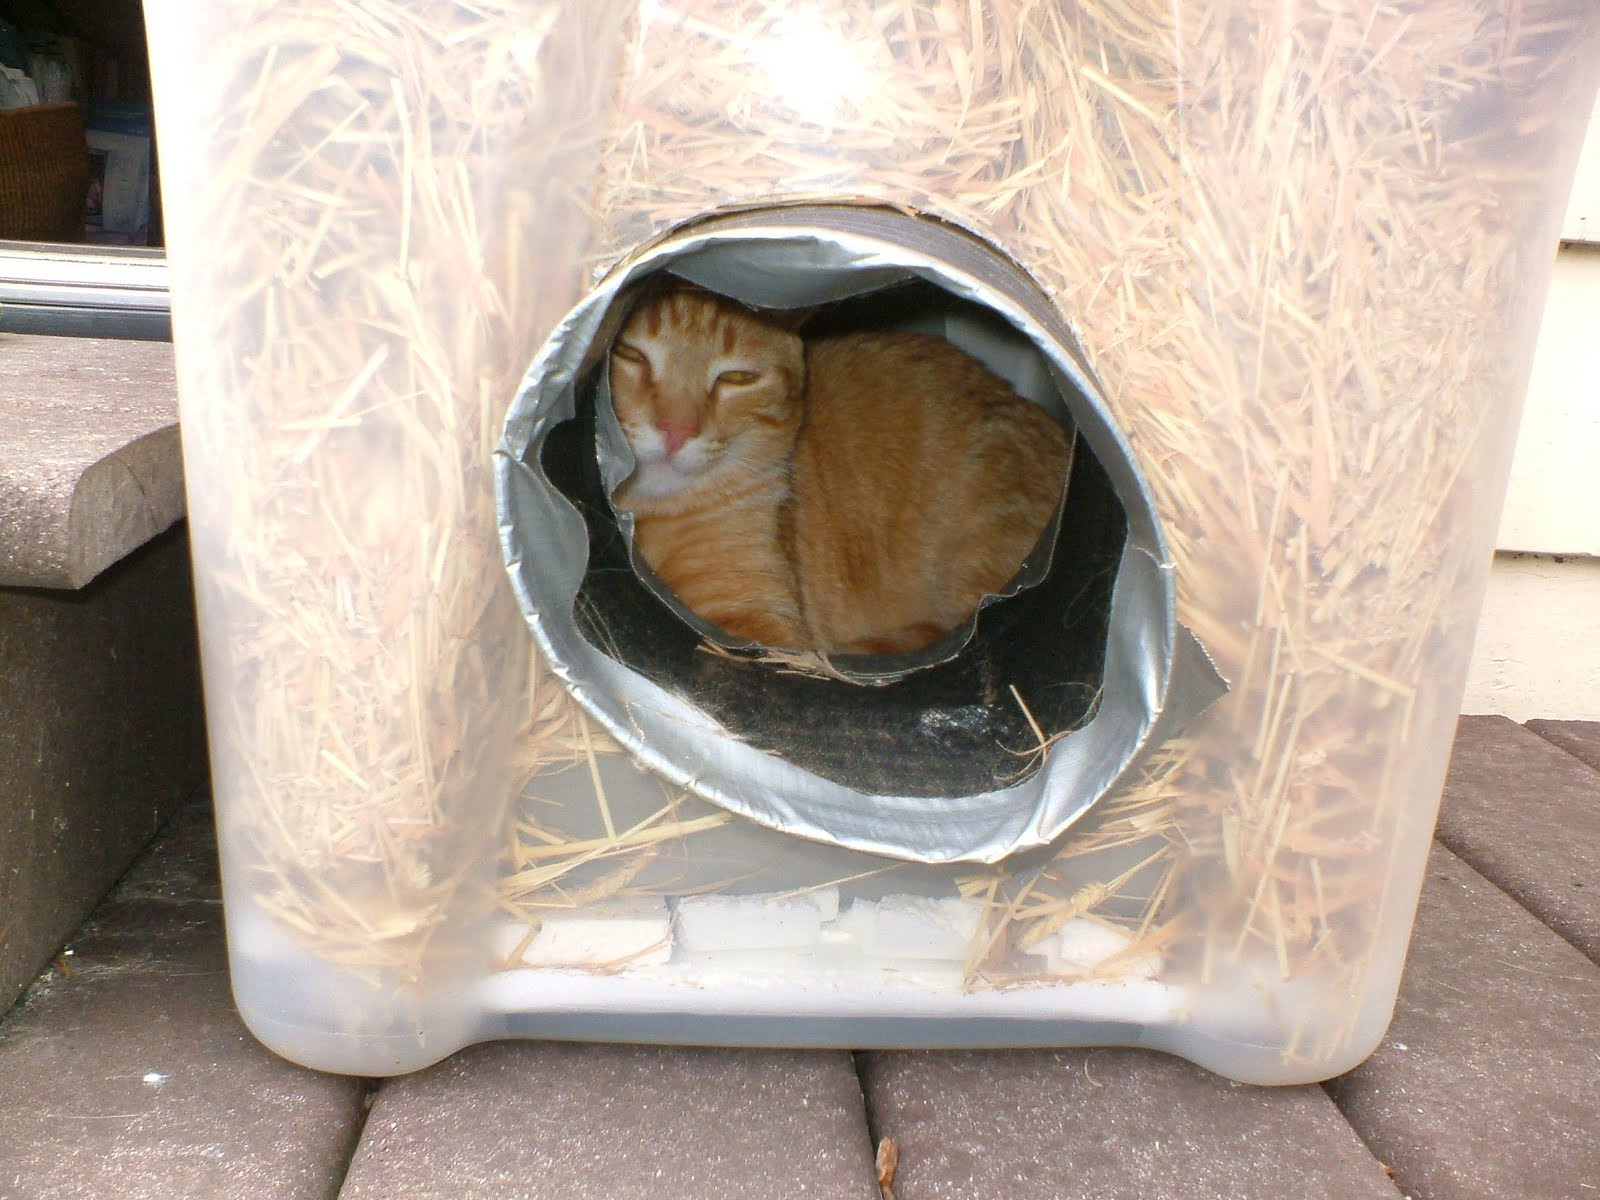 DIY Outdoor Cat House For Winter
 The Very Best Cats How to Make a Winter Shelter for an